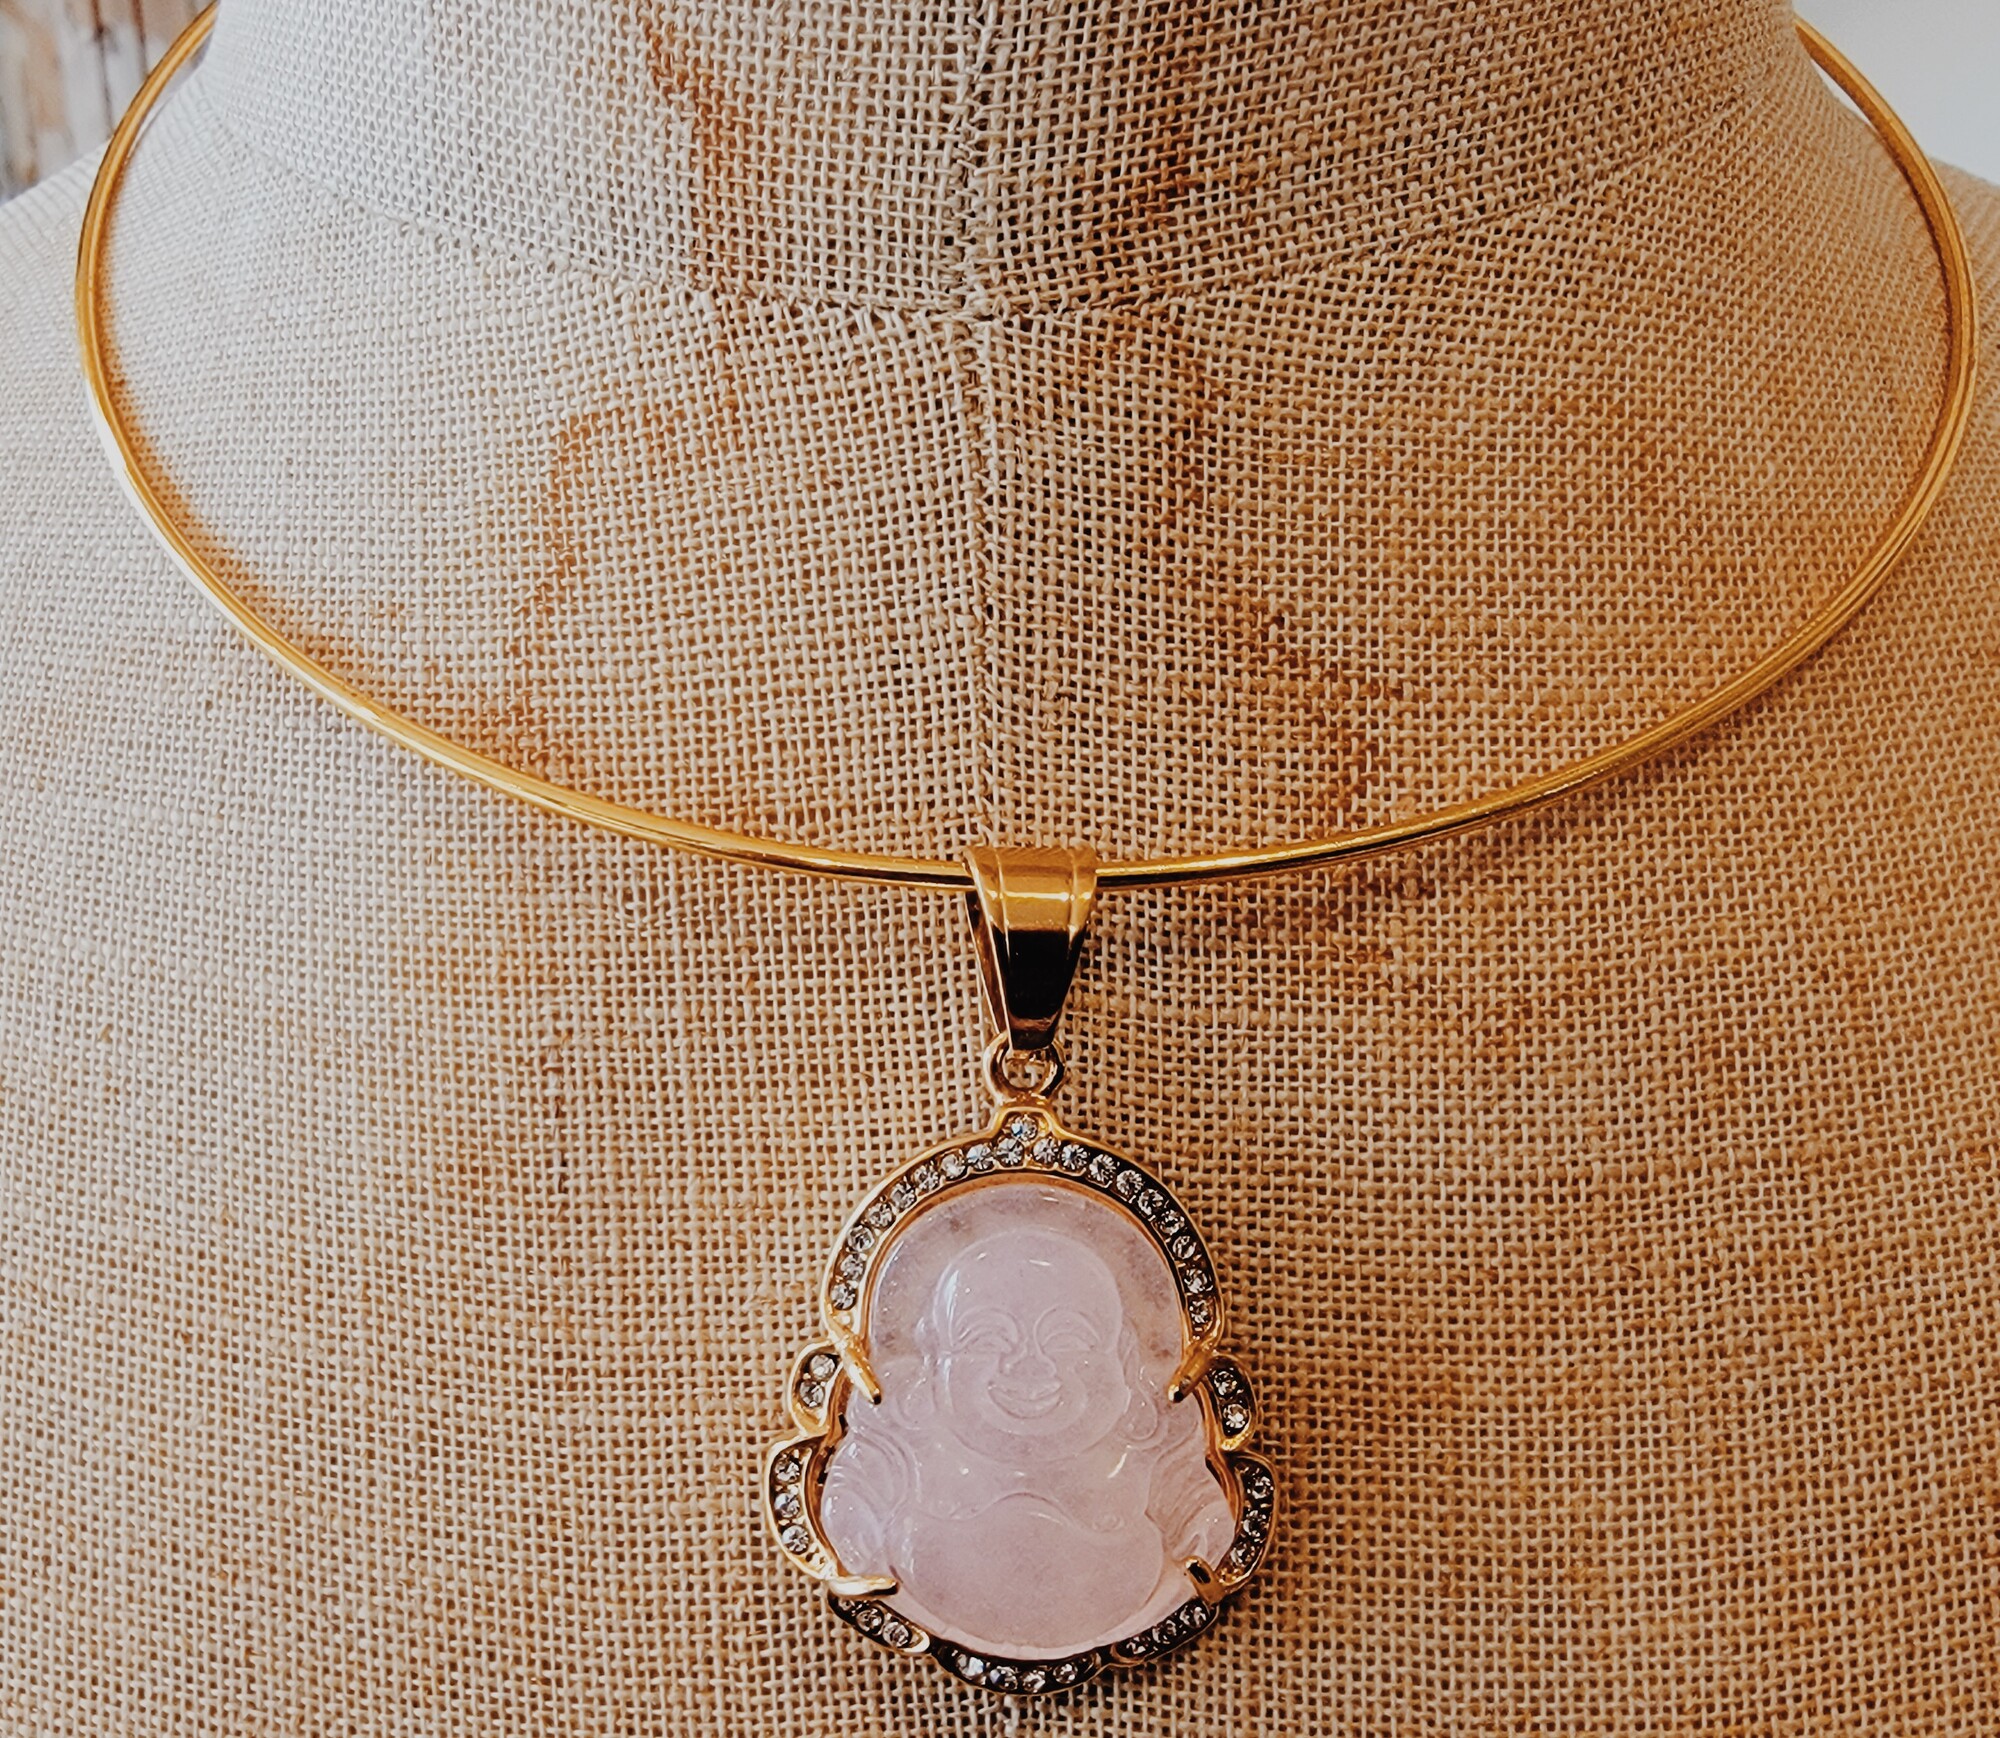 This beautiful gold choker has a pink buddah hanging with a gold border. Such a cute piece for layering!